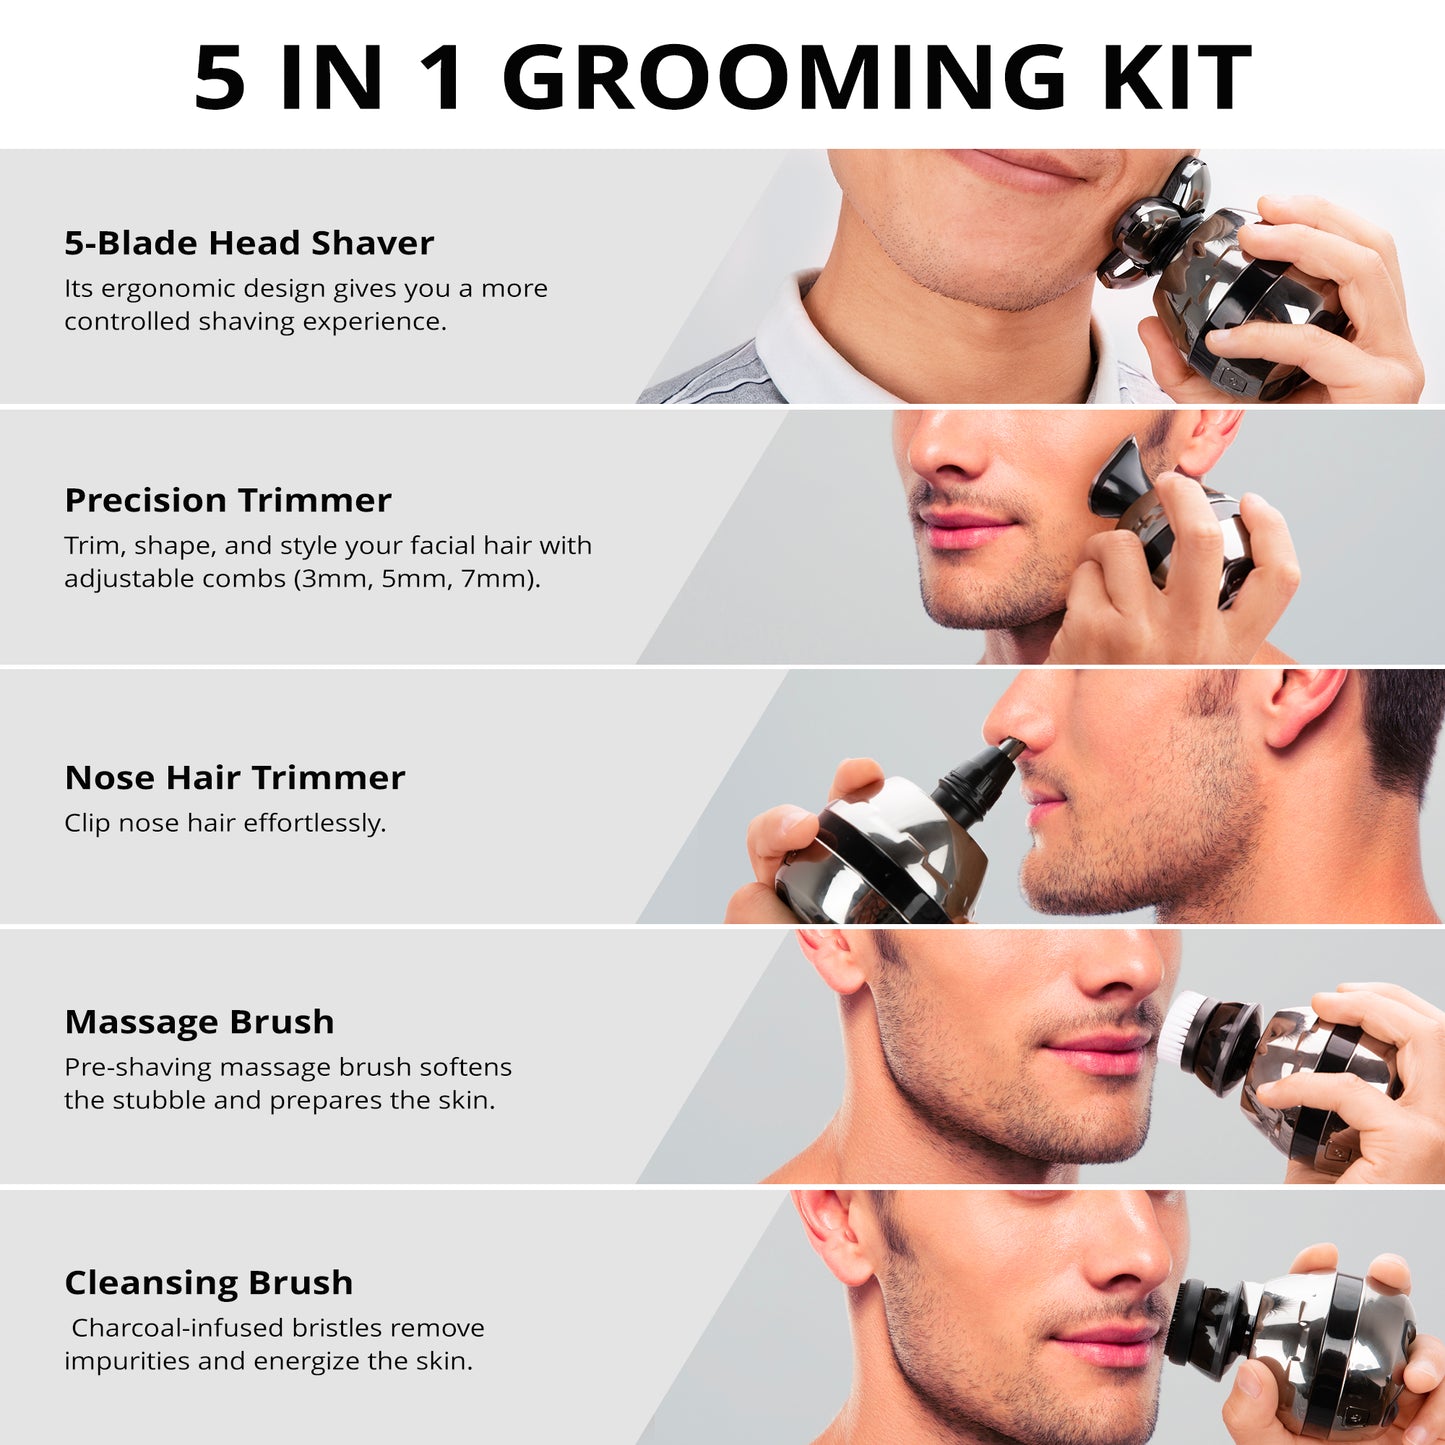 AW 5D Head Shavers for Bald Men, Anti-Pinch Electric Razor for Men, 5-in-1 Mens Grooming Kit with Nose Hair Trimmer, Beard Trimmer for Men, Waterproof and Rechargeable Electric Shavers for Men